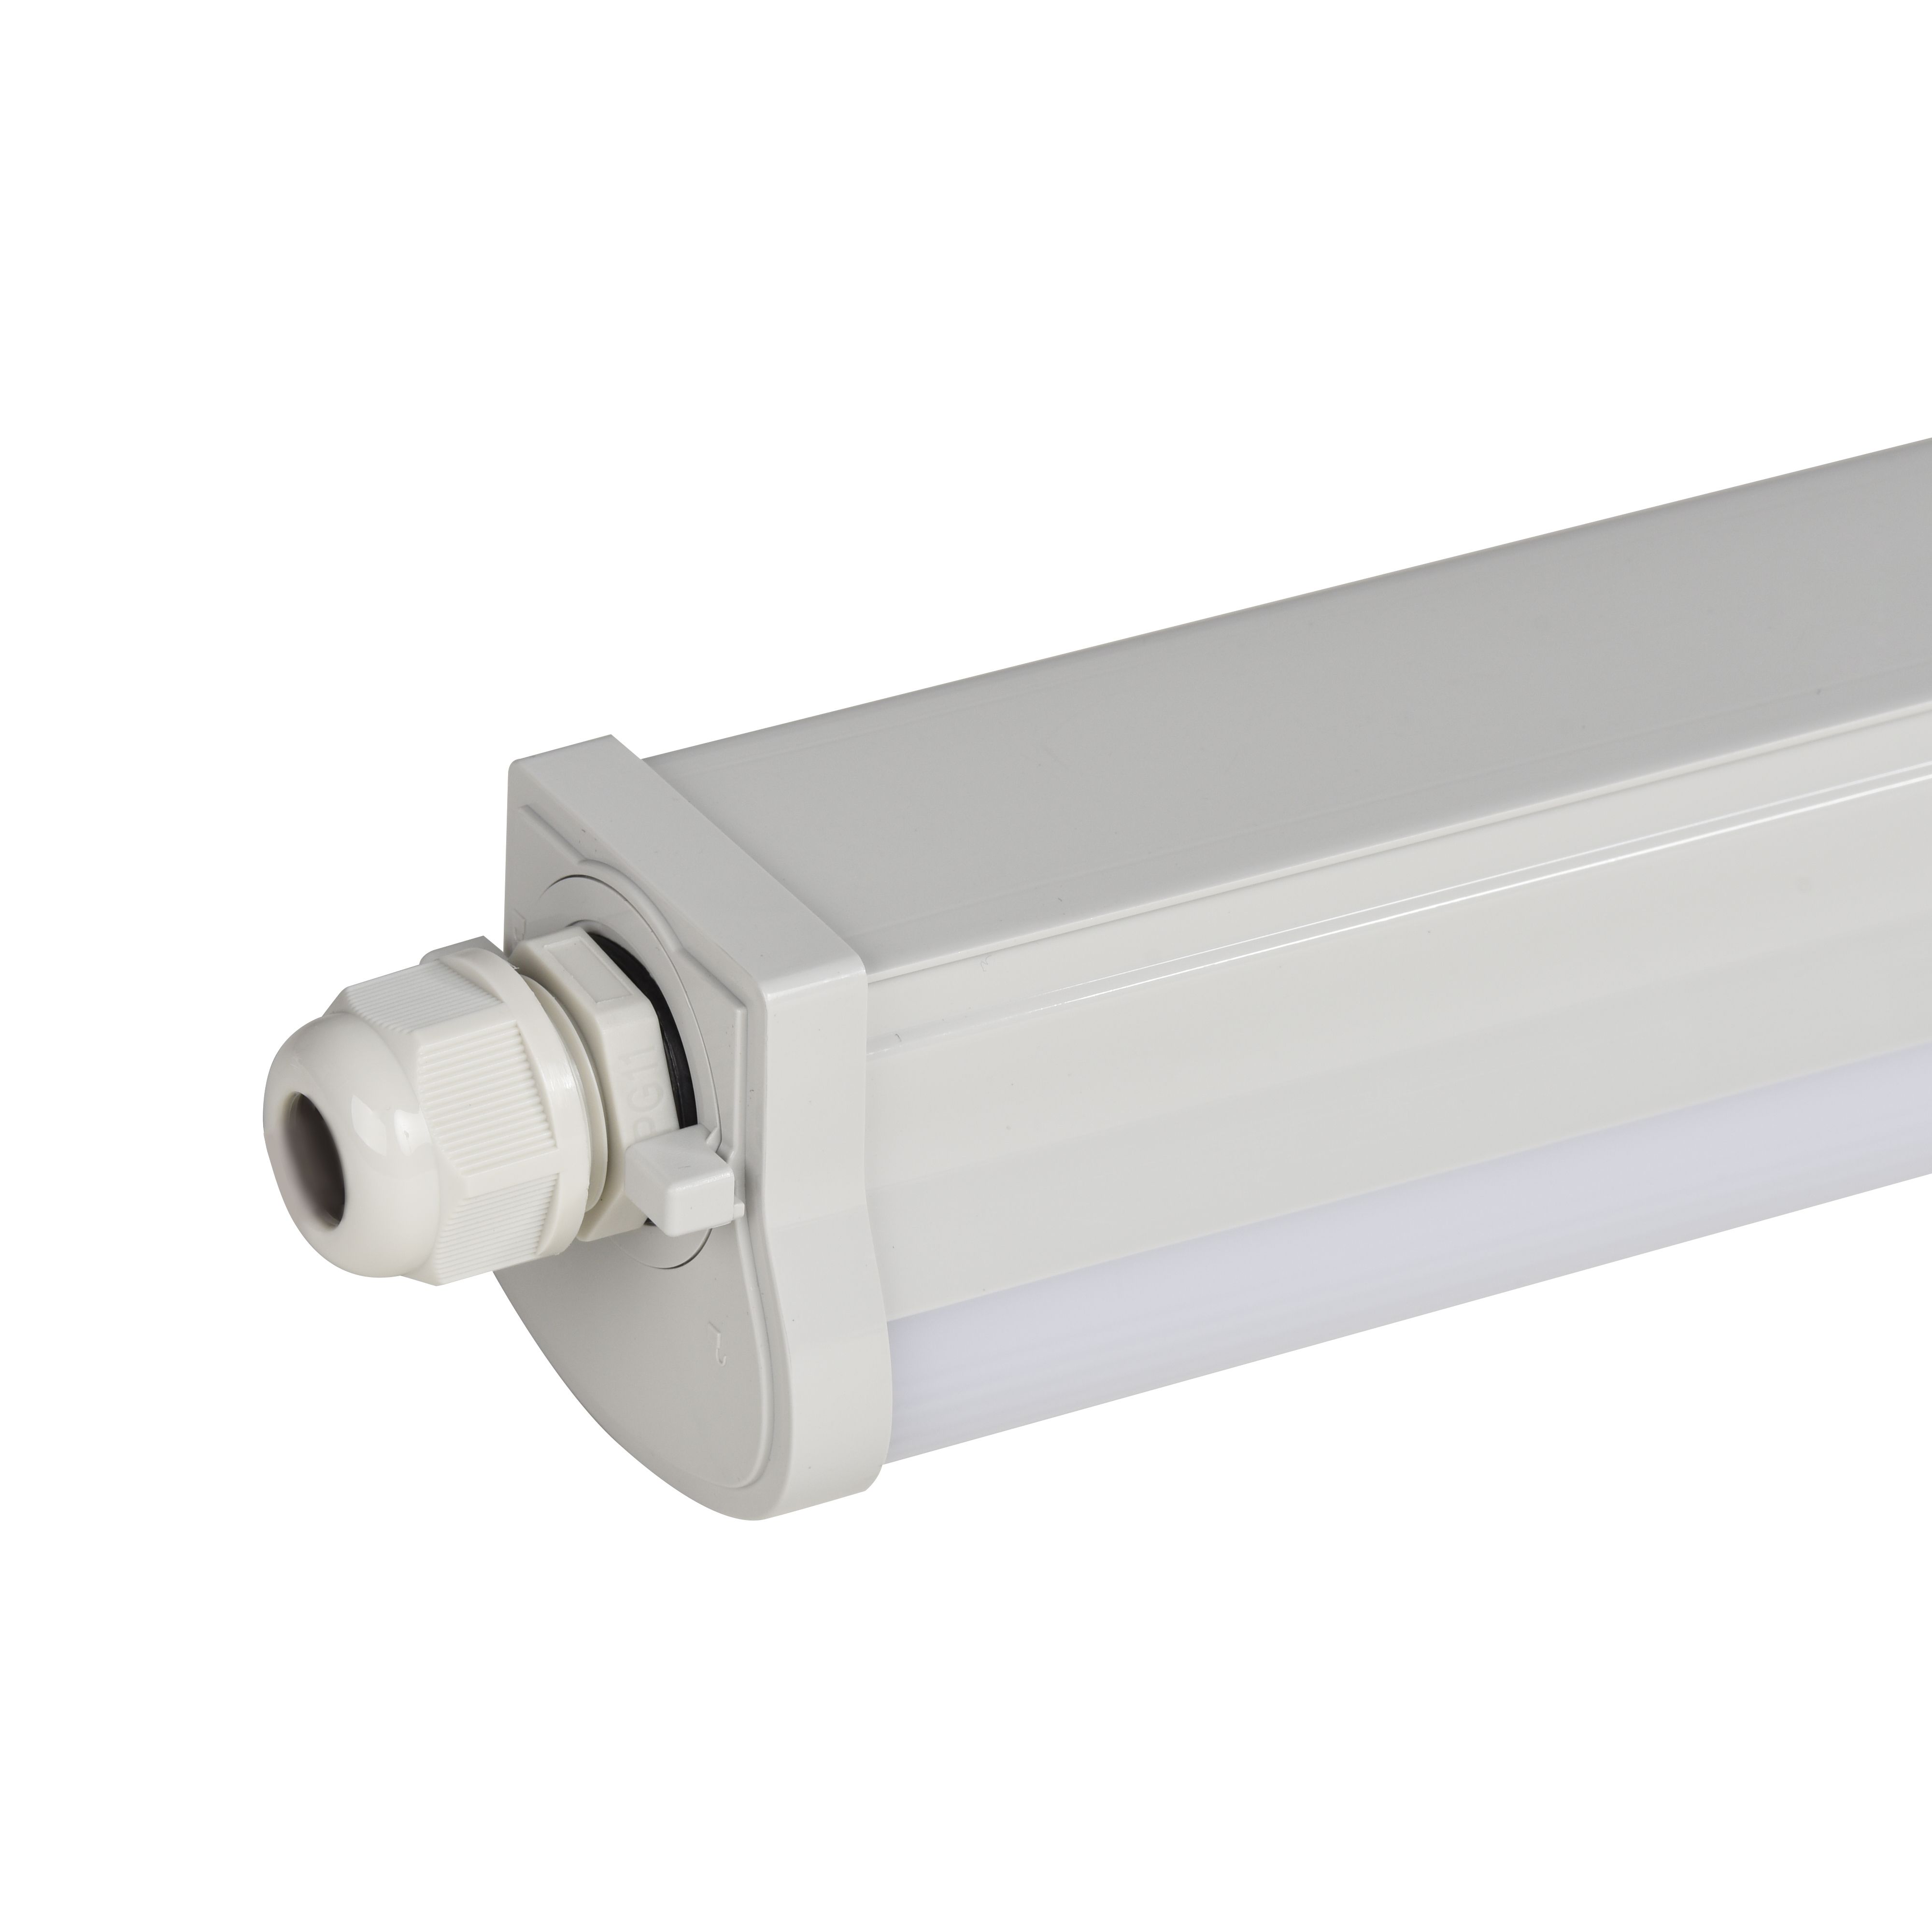 Afonso Neutral white Integrated LED Batten 19W 2100lm (L)0.53m